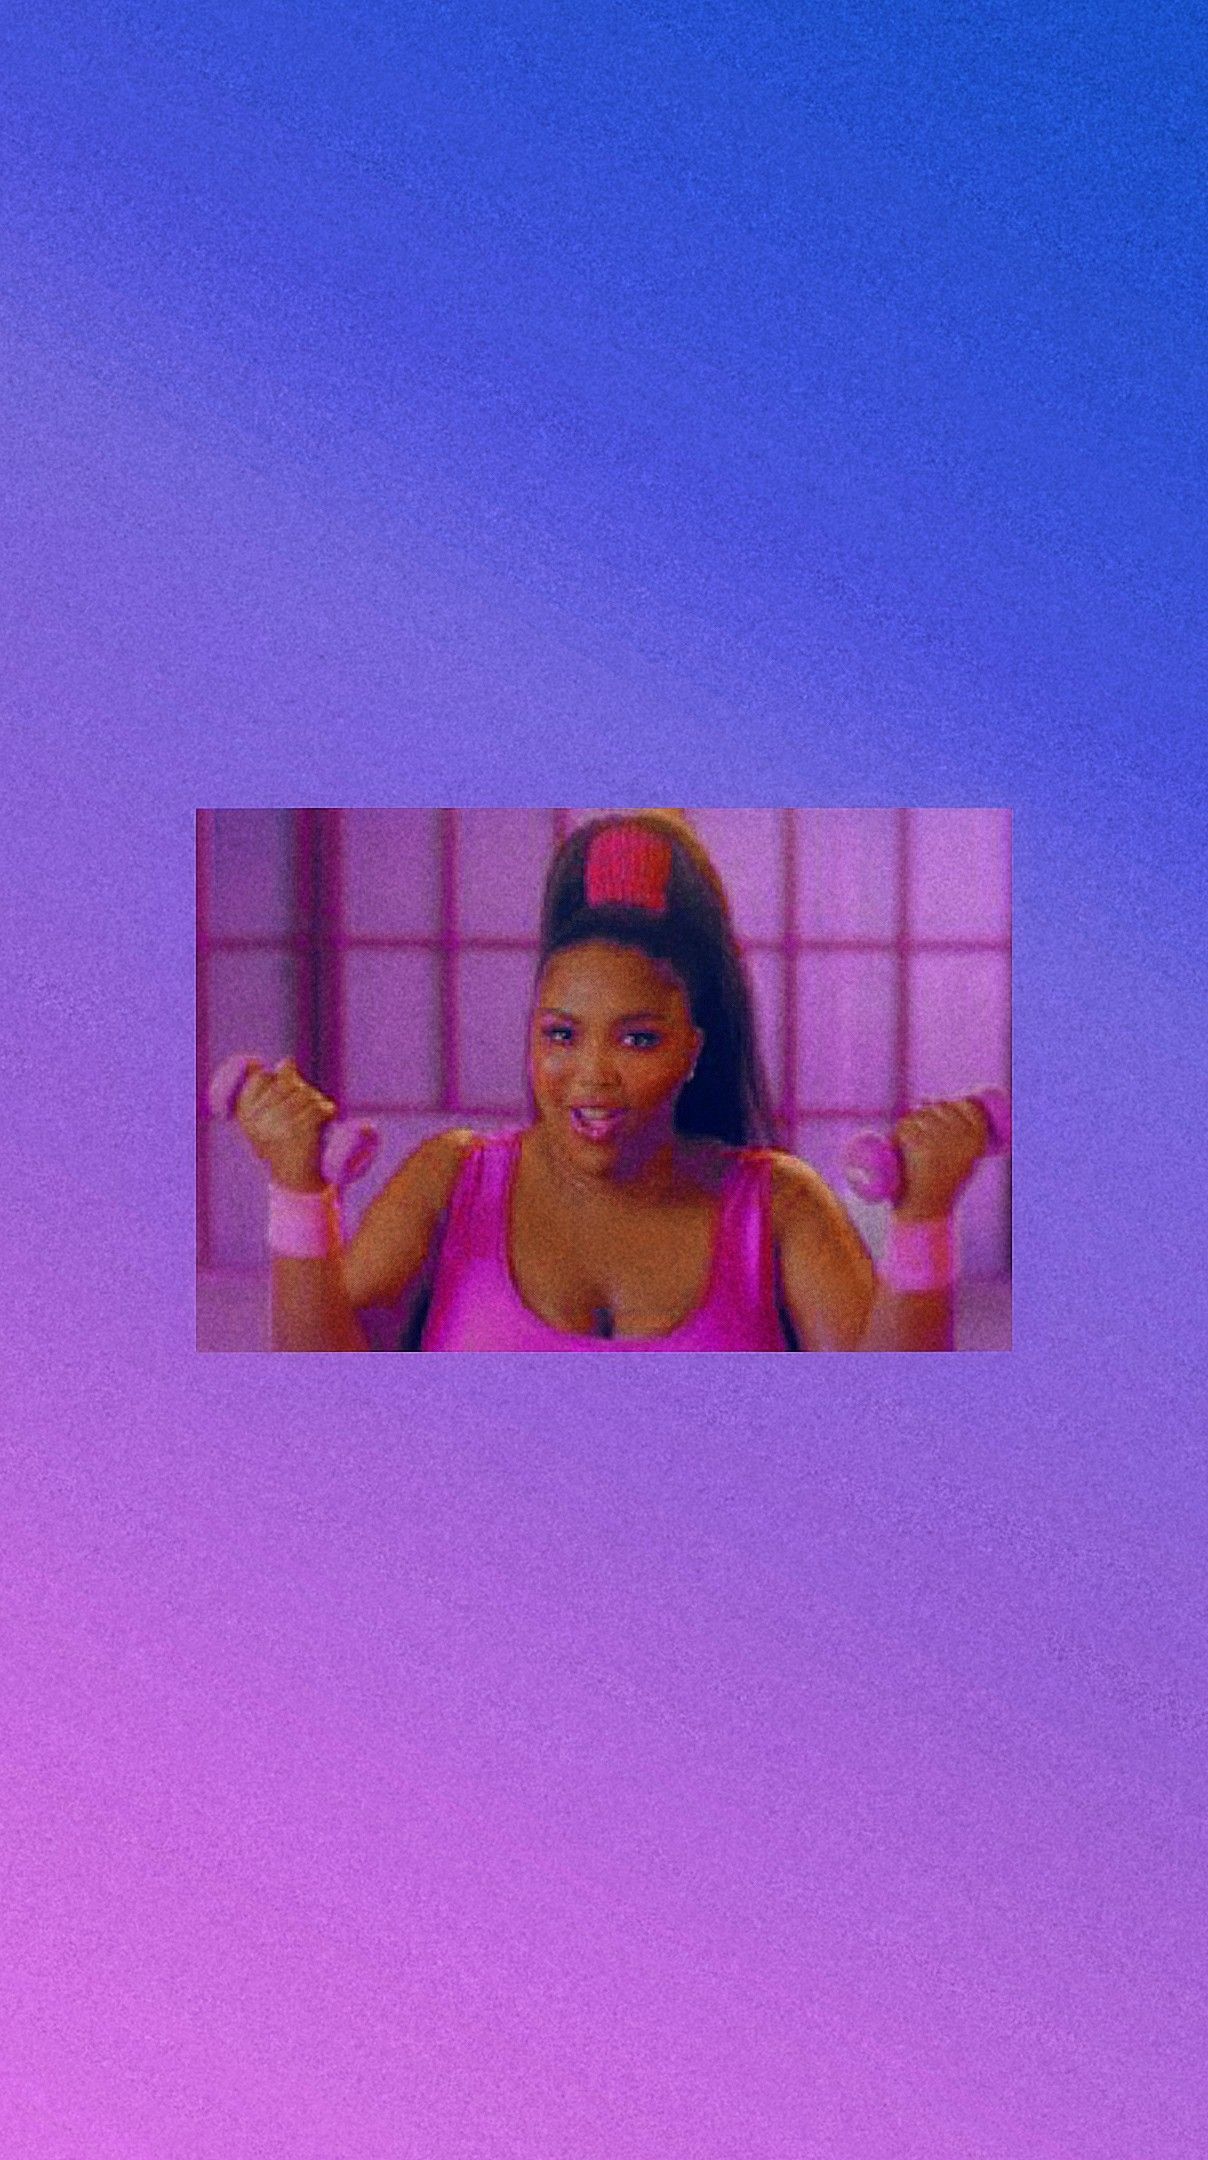 Lizzo Wallpapers